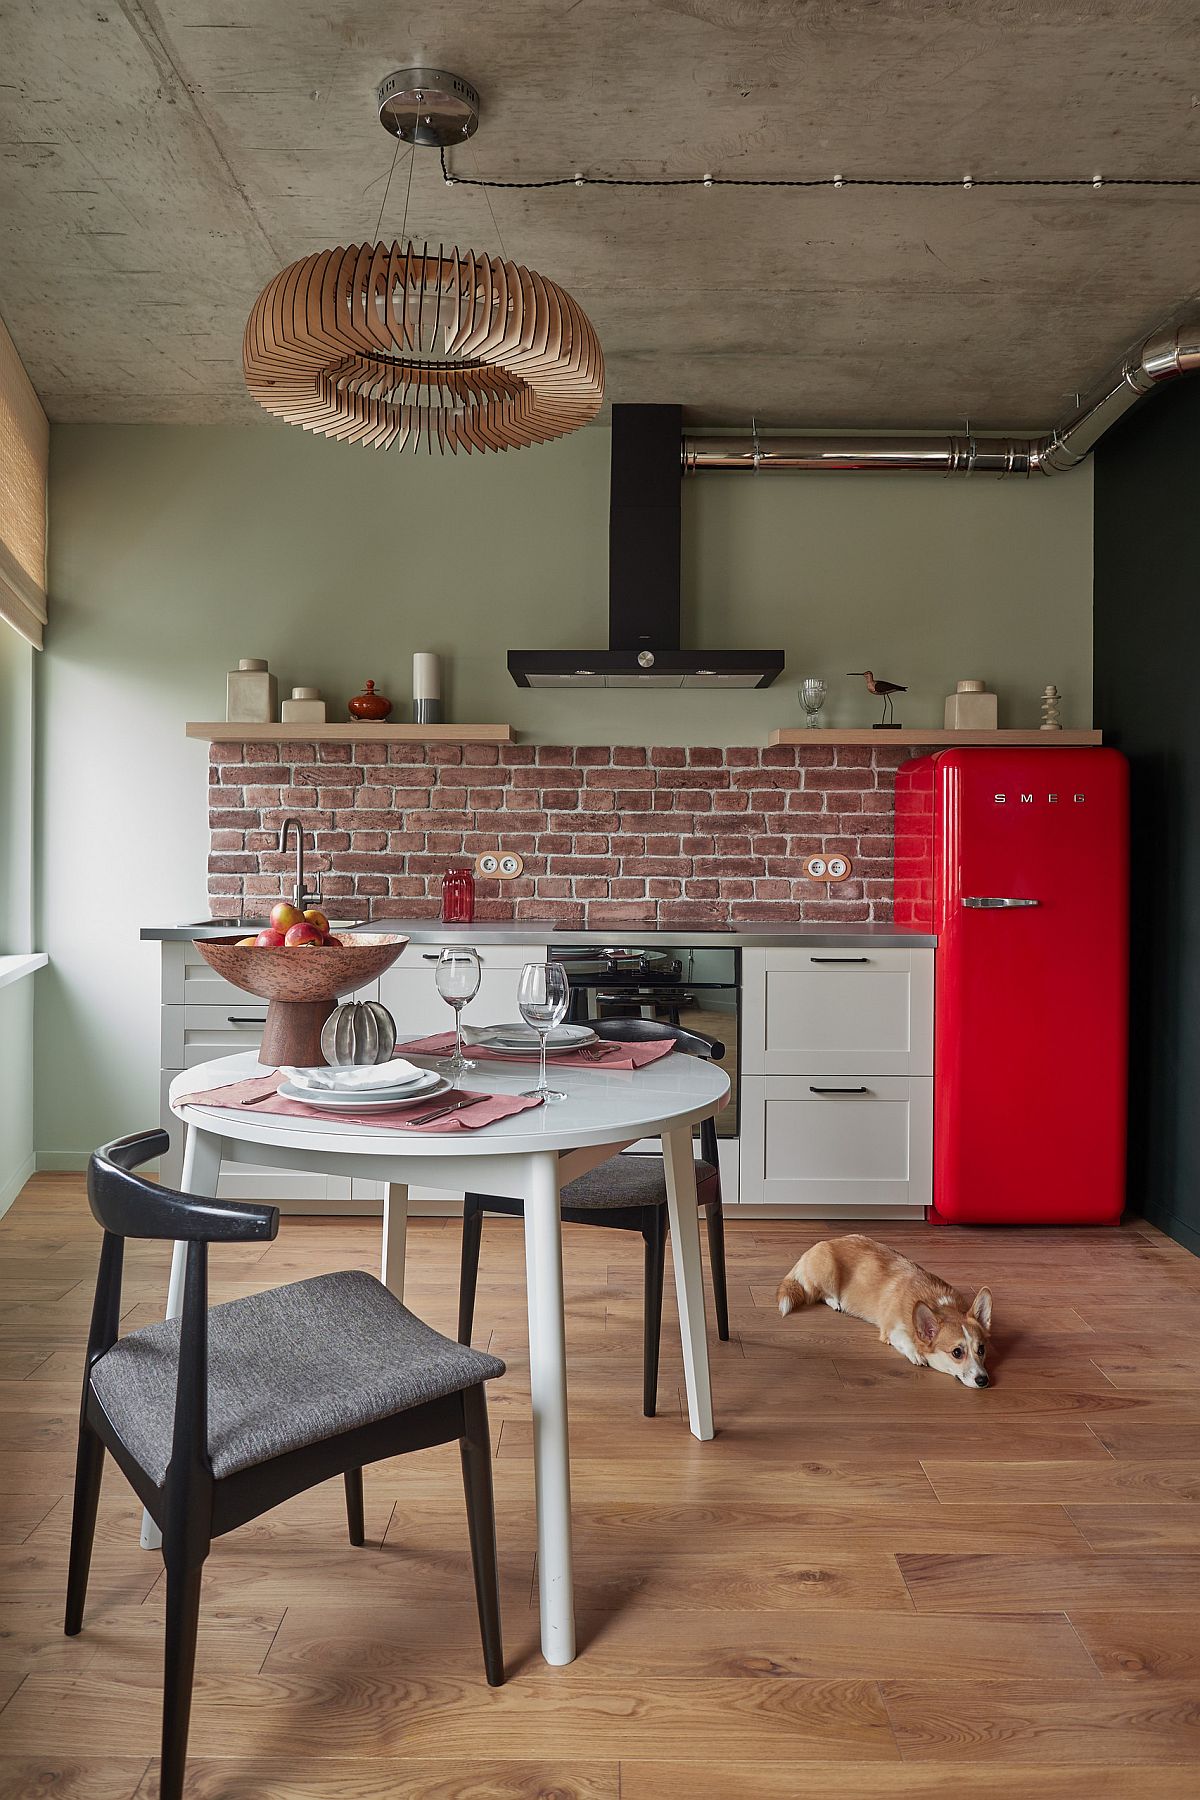 Red-refrigerator-brings-color-to-this-small-industrial-kitchen-of-Moscow-apartment-with-retro-touches-37510